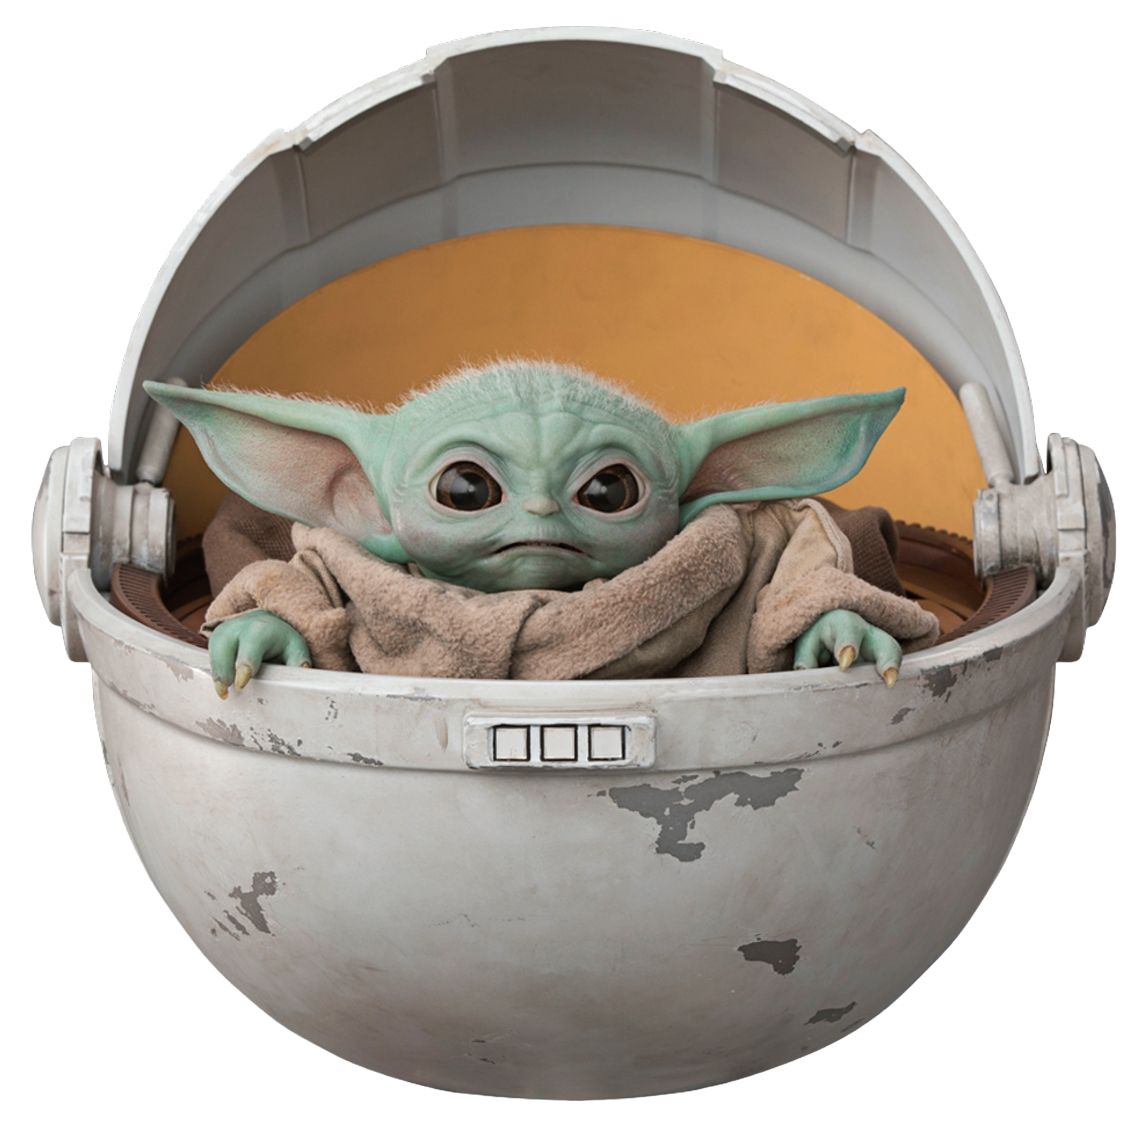 https://static.wikia.nocookie.net/starwars/images/2/24/TheChildPod-Fathead.png/revision/latest?cb=20221028143927